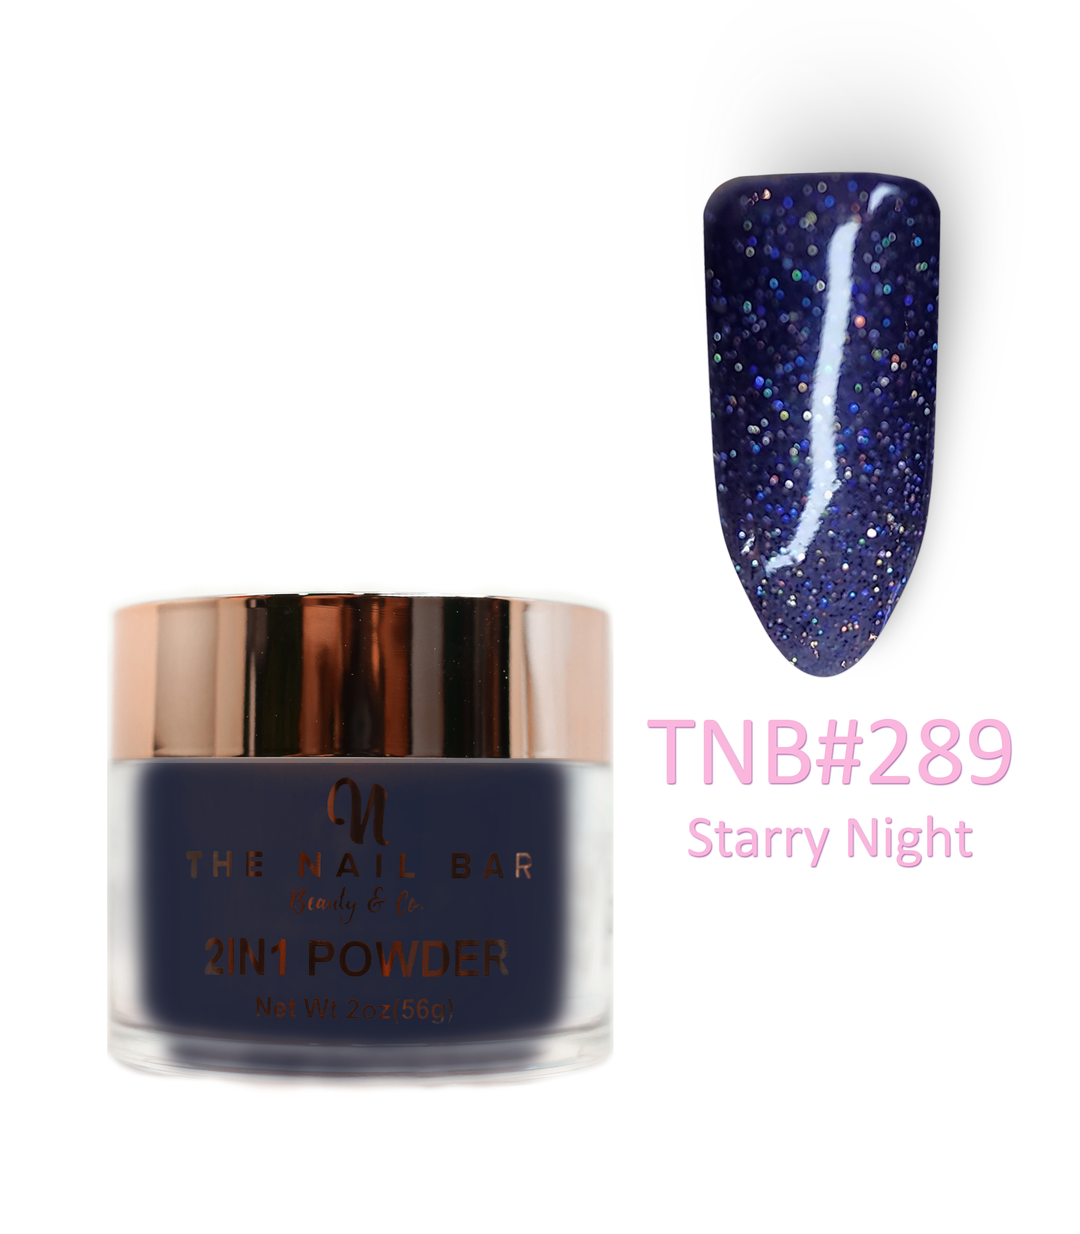 2-In-1 Dipping/Acrylic colour powder (2oz) - Starry Night